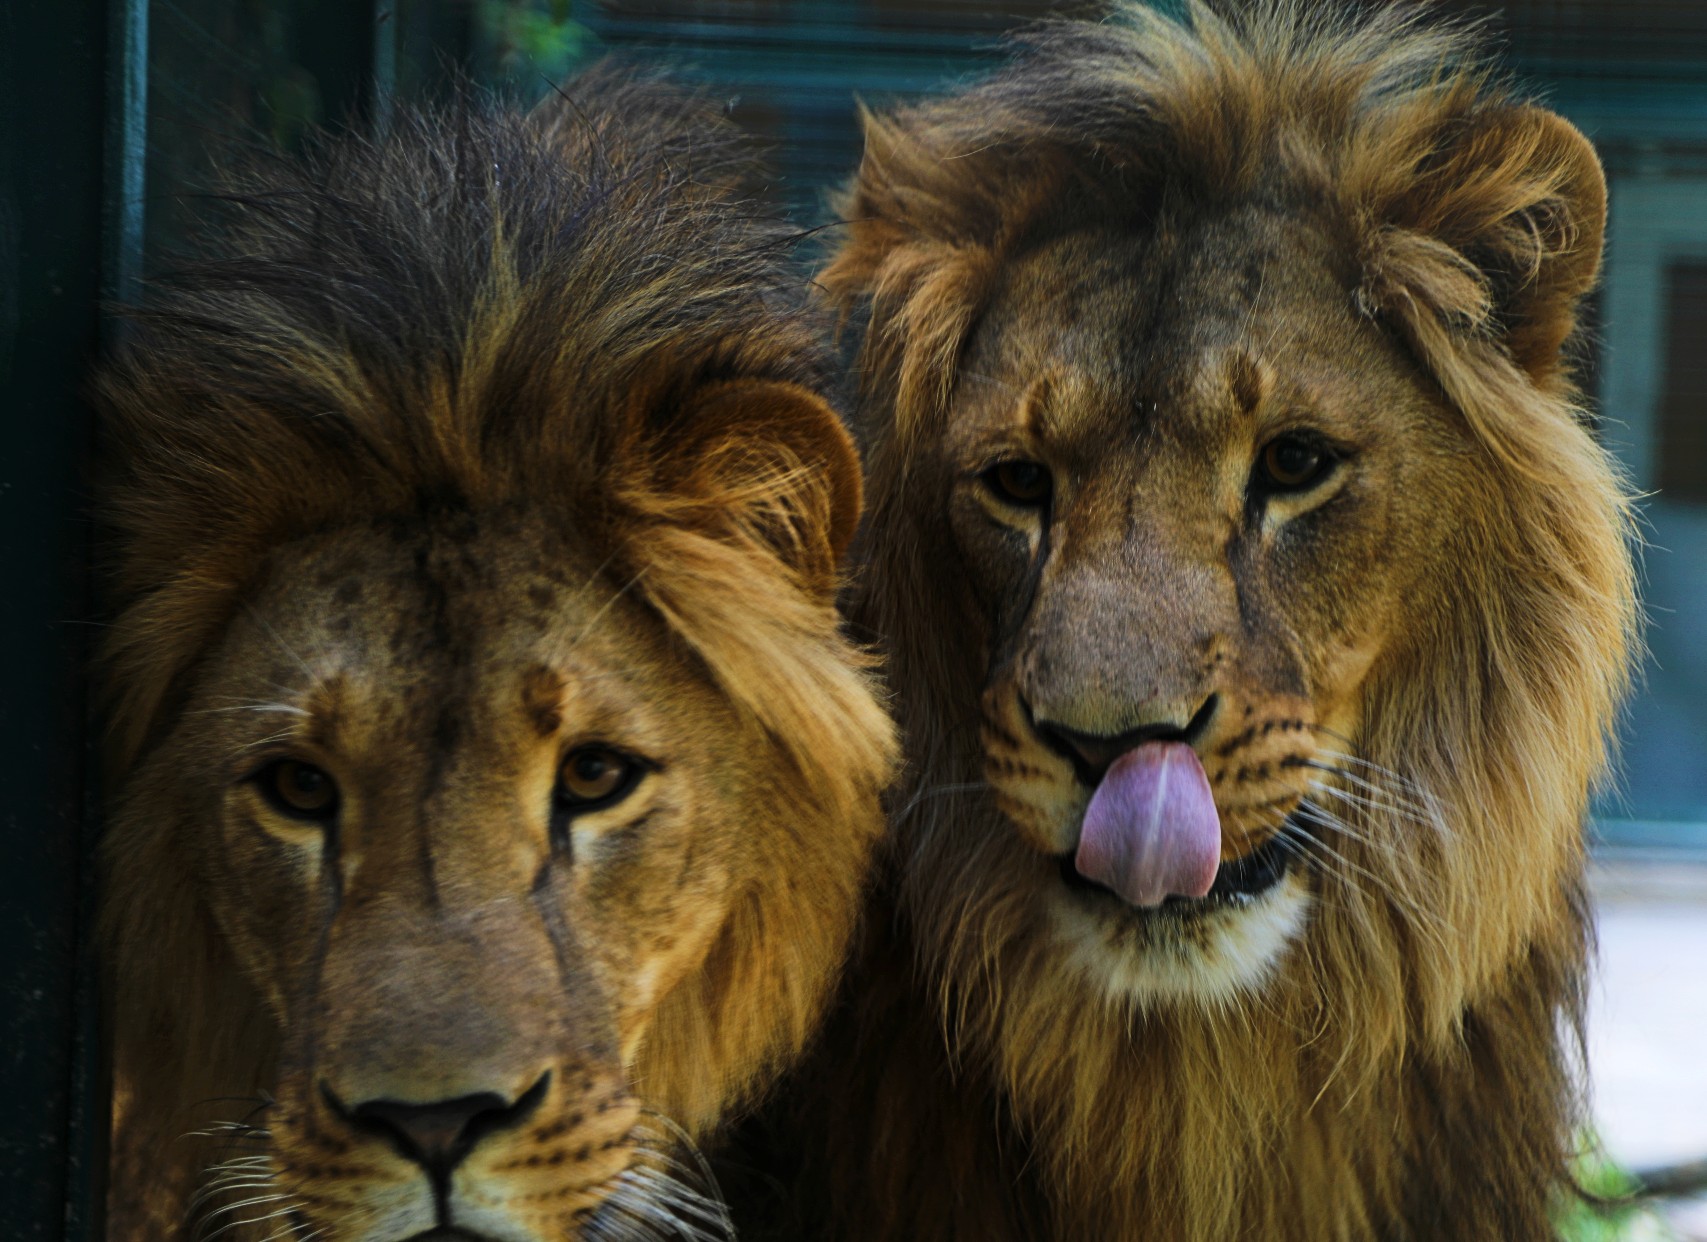 A close-up photo of two young male lions - one licking his lips